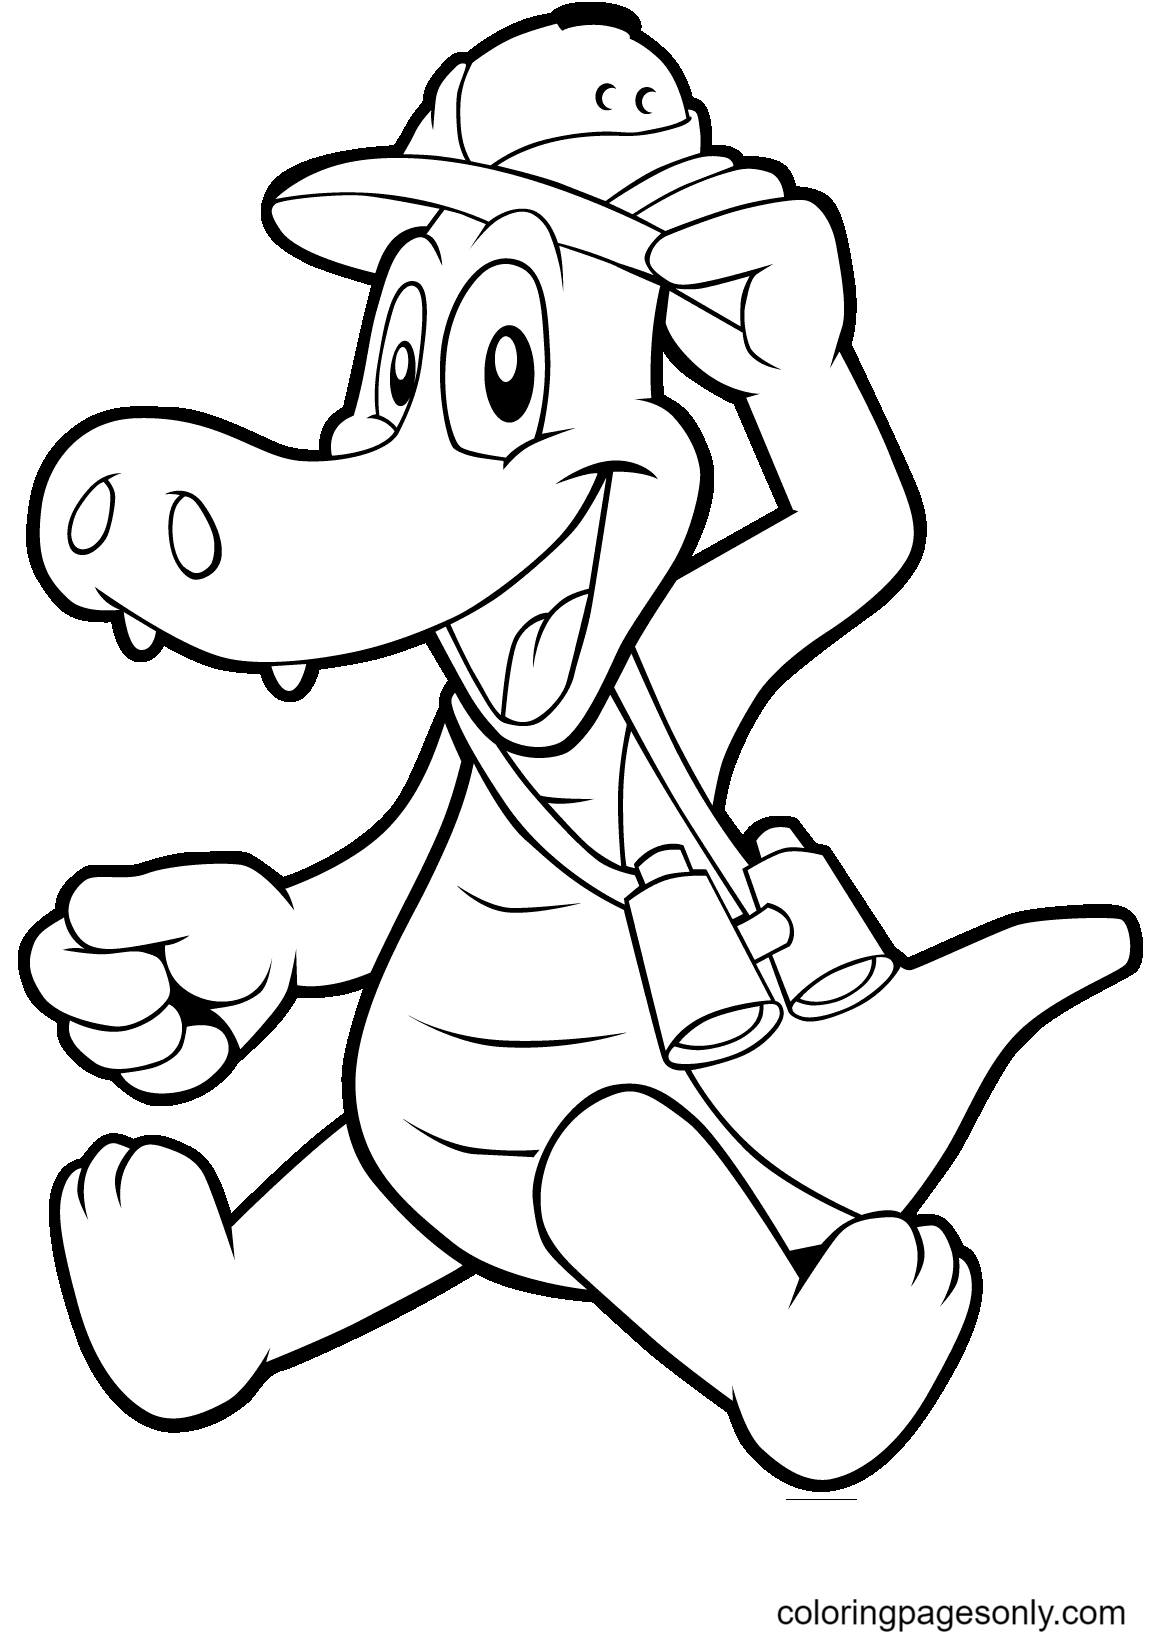 Cute Cartoon Alligator Coloring Pages